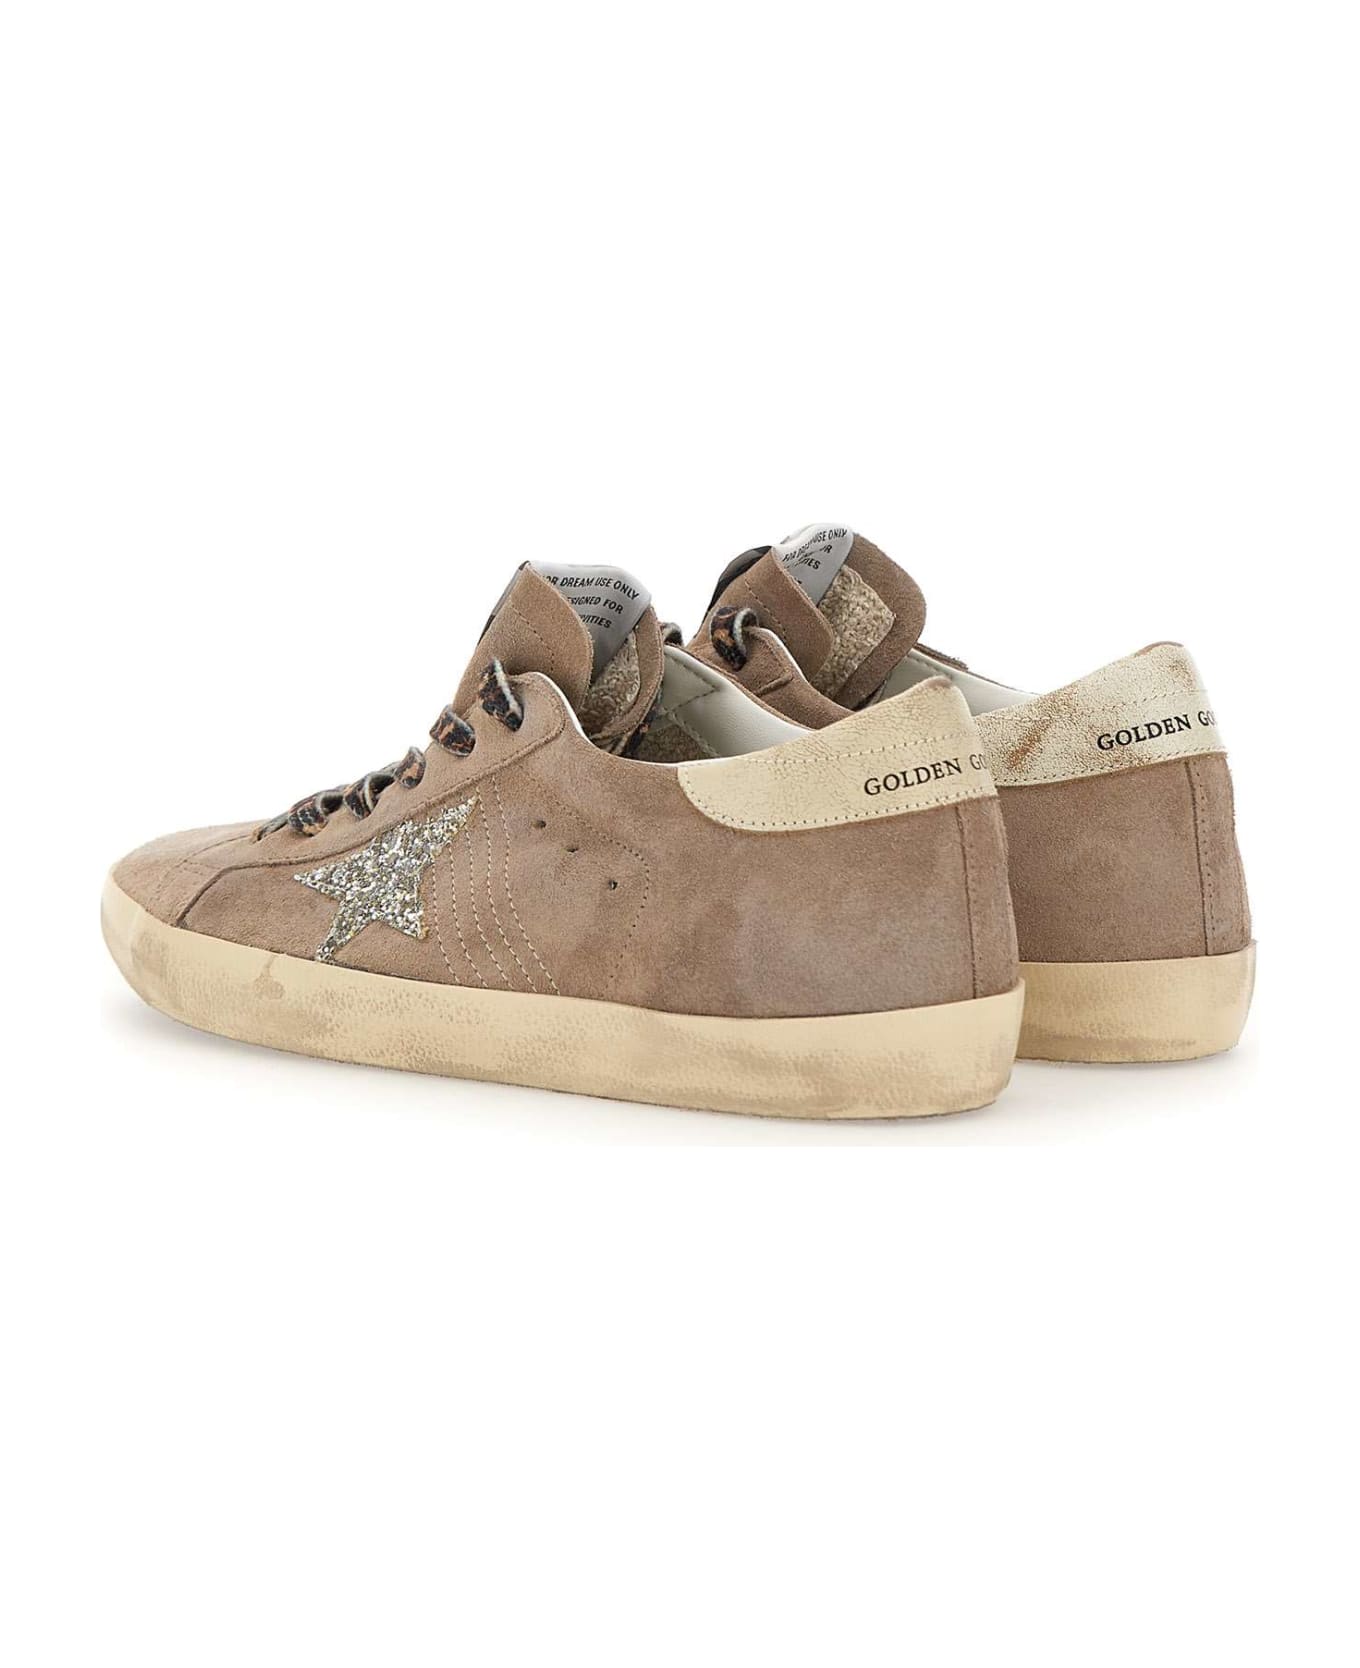 Golden Goose Super-star Leather Low-top Sneakers - Taupe/Platinum/White/Ecru